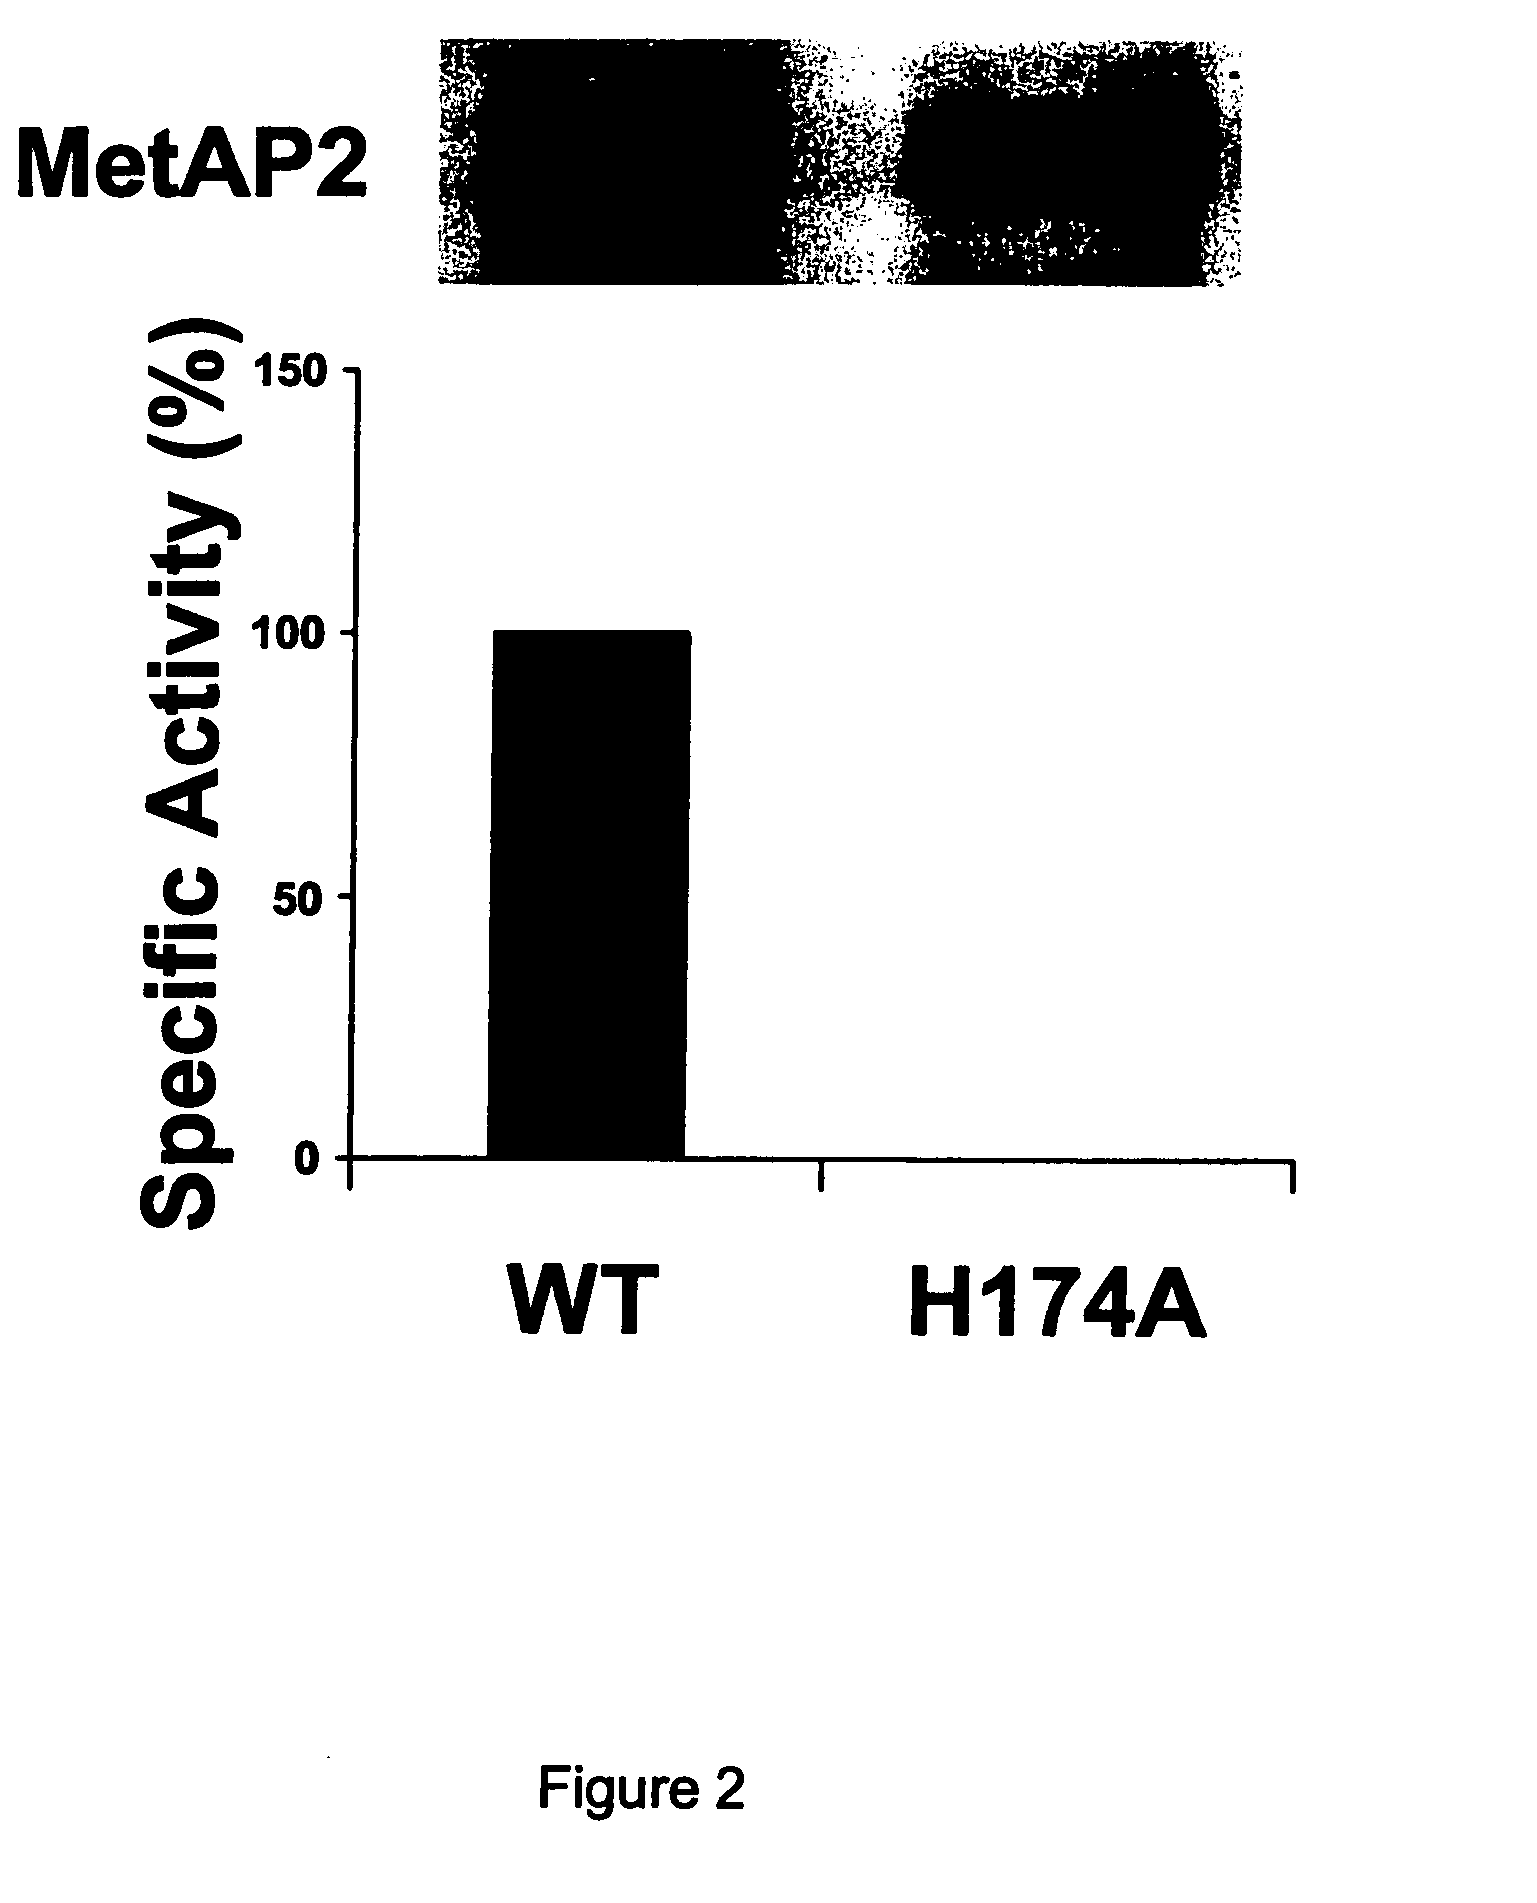 Dominant negative variants of methionine aminopeptidase 2 (MetAP2) and clinical uses thereof